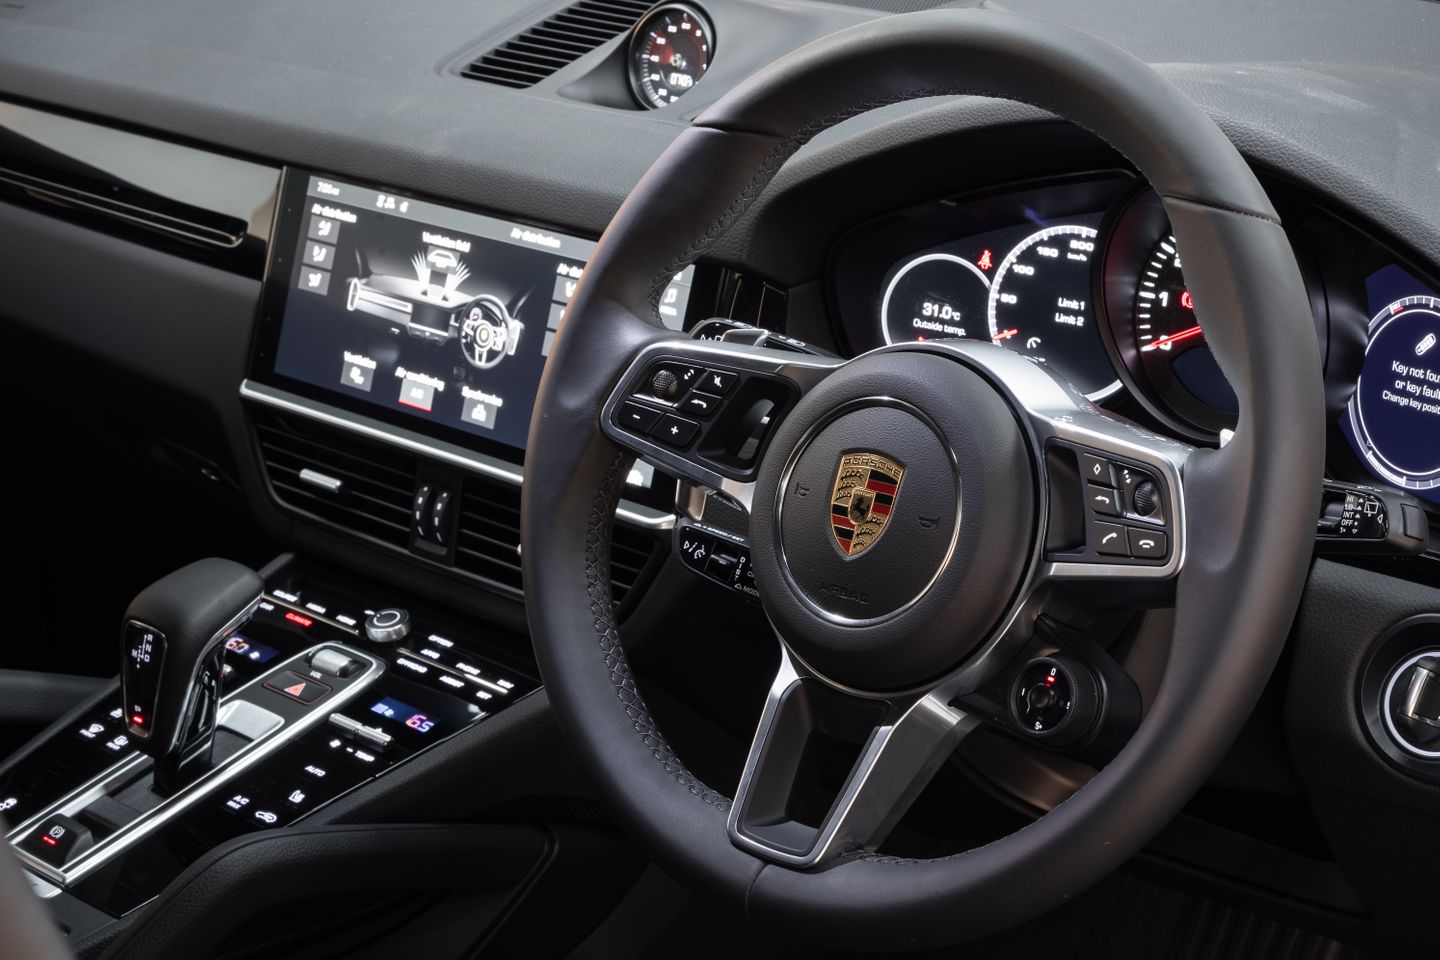 Porsche Advanced Cockpit with hybrid-specific displays - The new